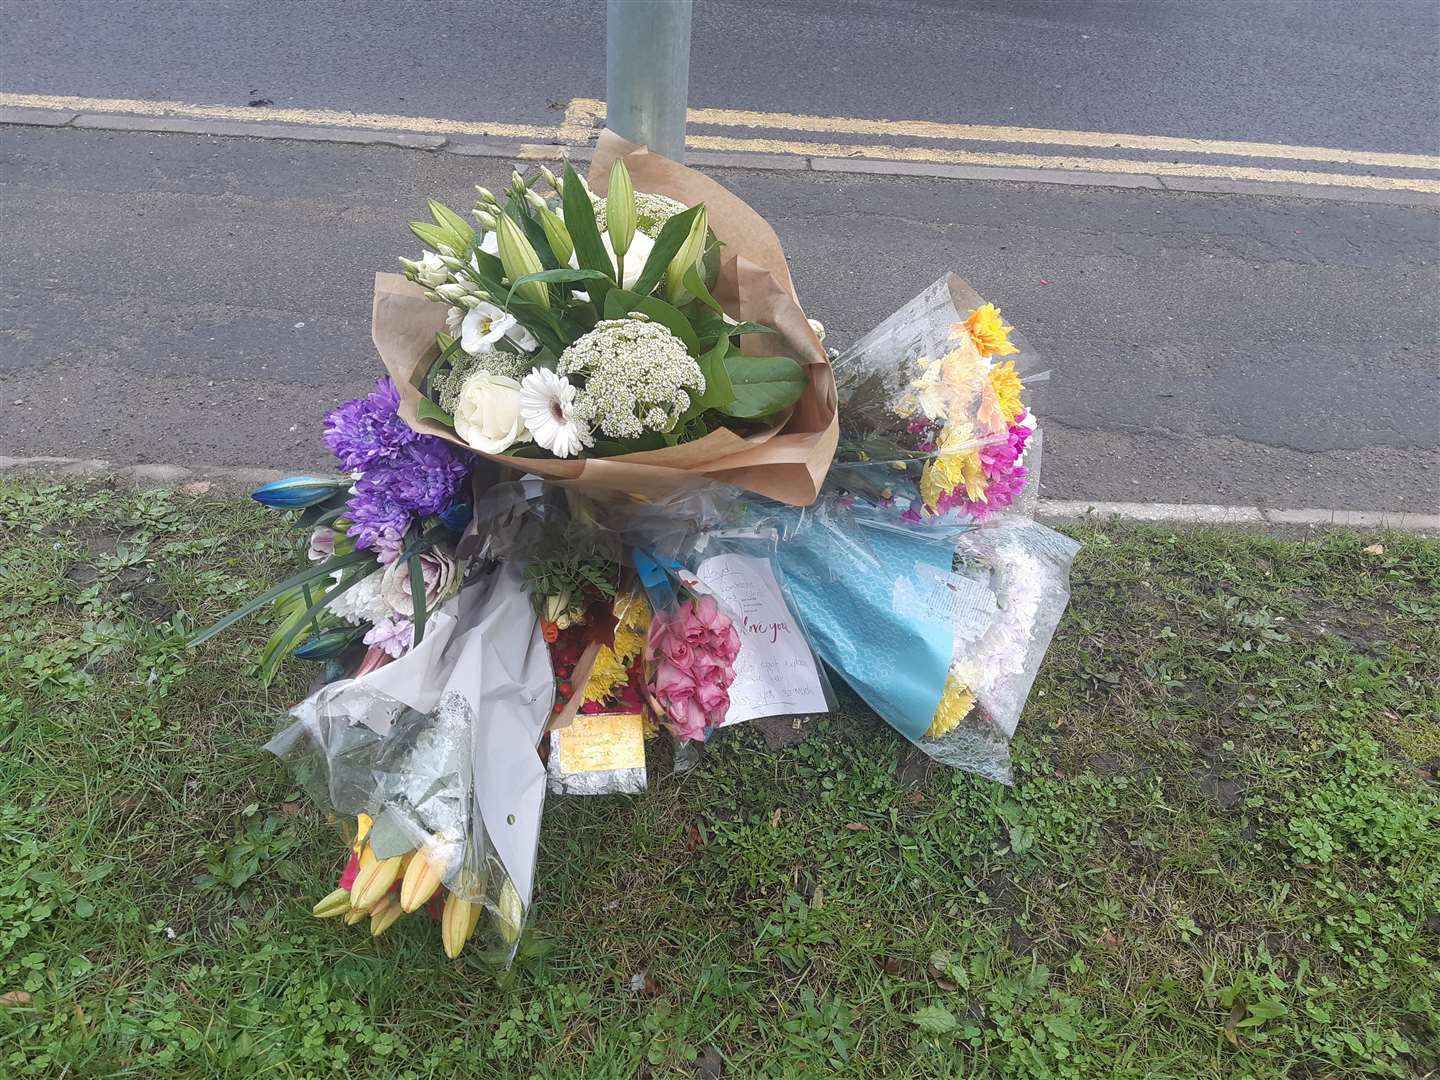 Floral tributes were laid after the fatal collision on Medway City Estate